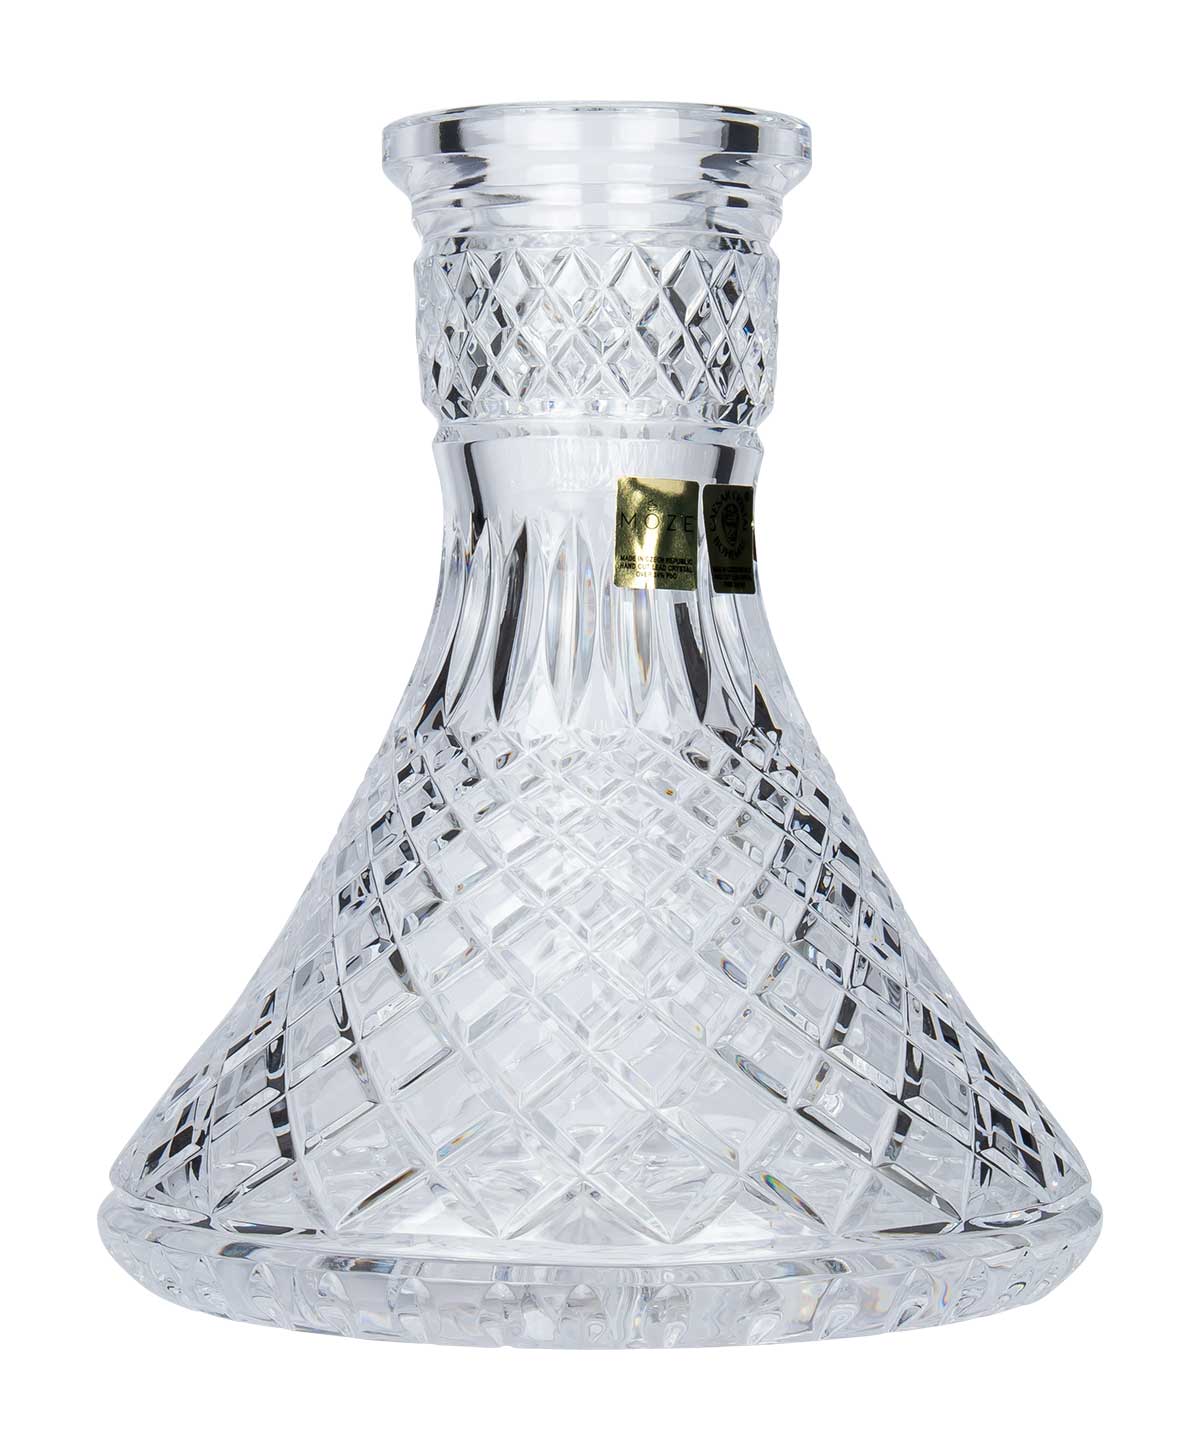 Moze Exclusive Glass Cone - Crown Cut - Clear